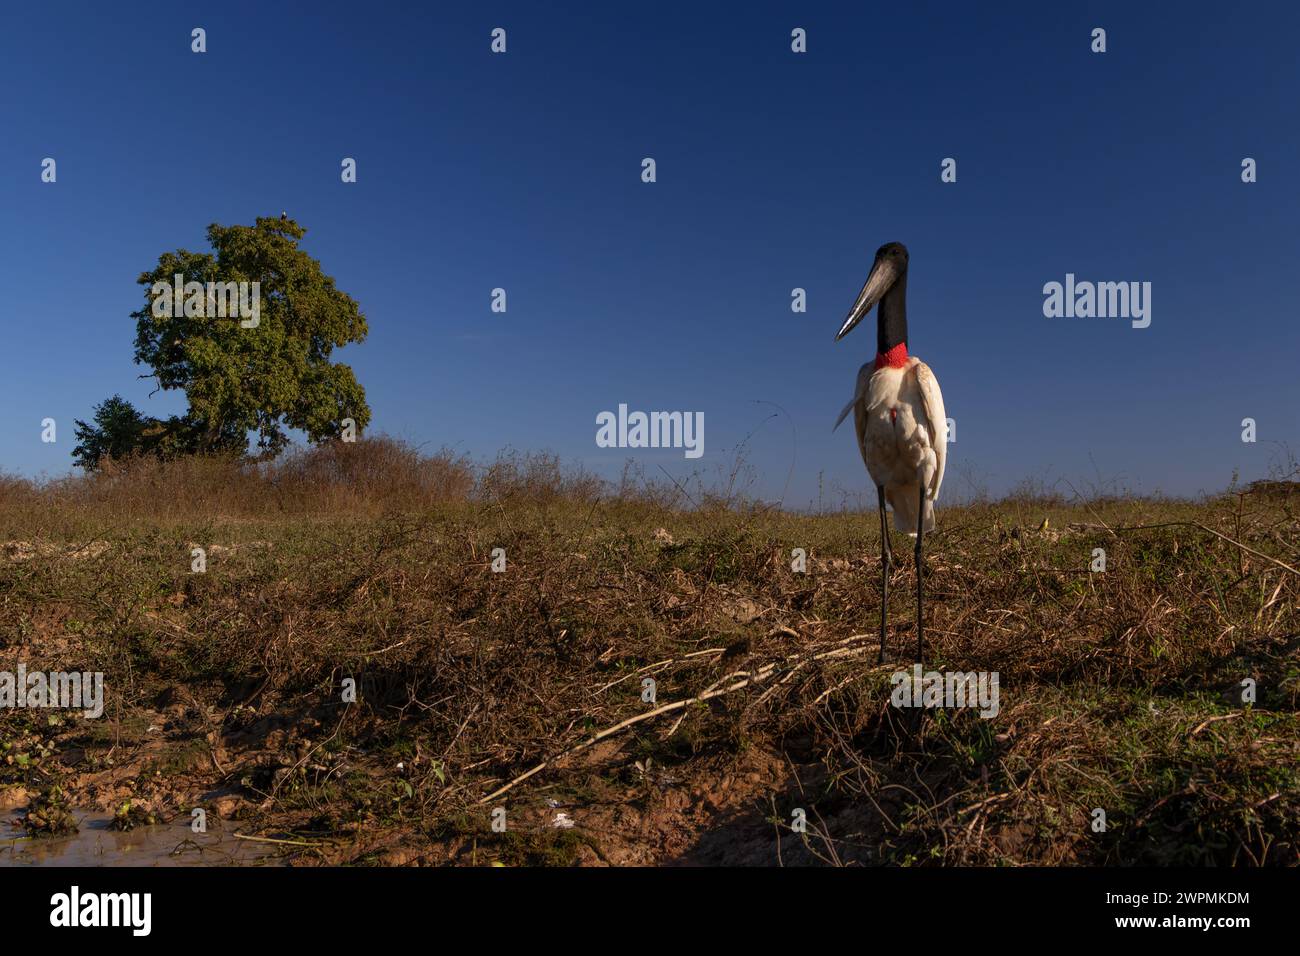 A Jaribu Stork looking at the camera standing at the river's edge against a blue sky background in the Pantanal, Brazil Stock Photo